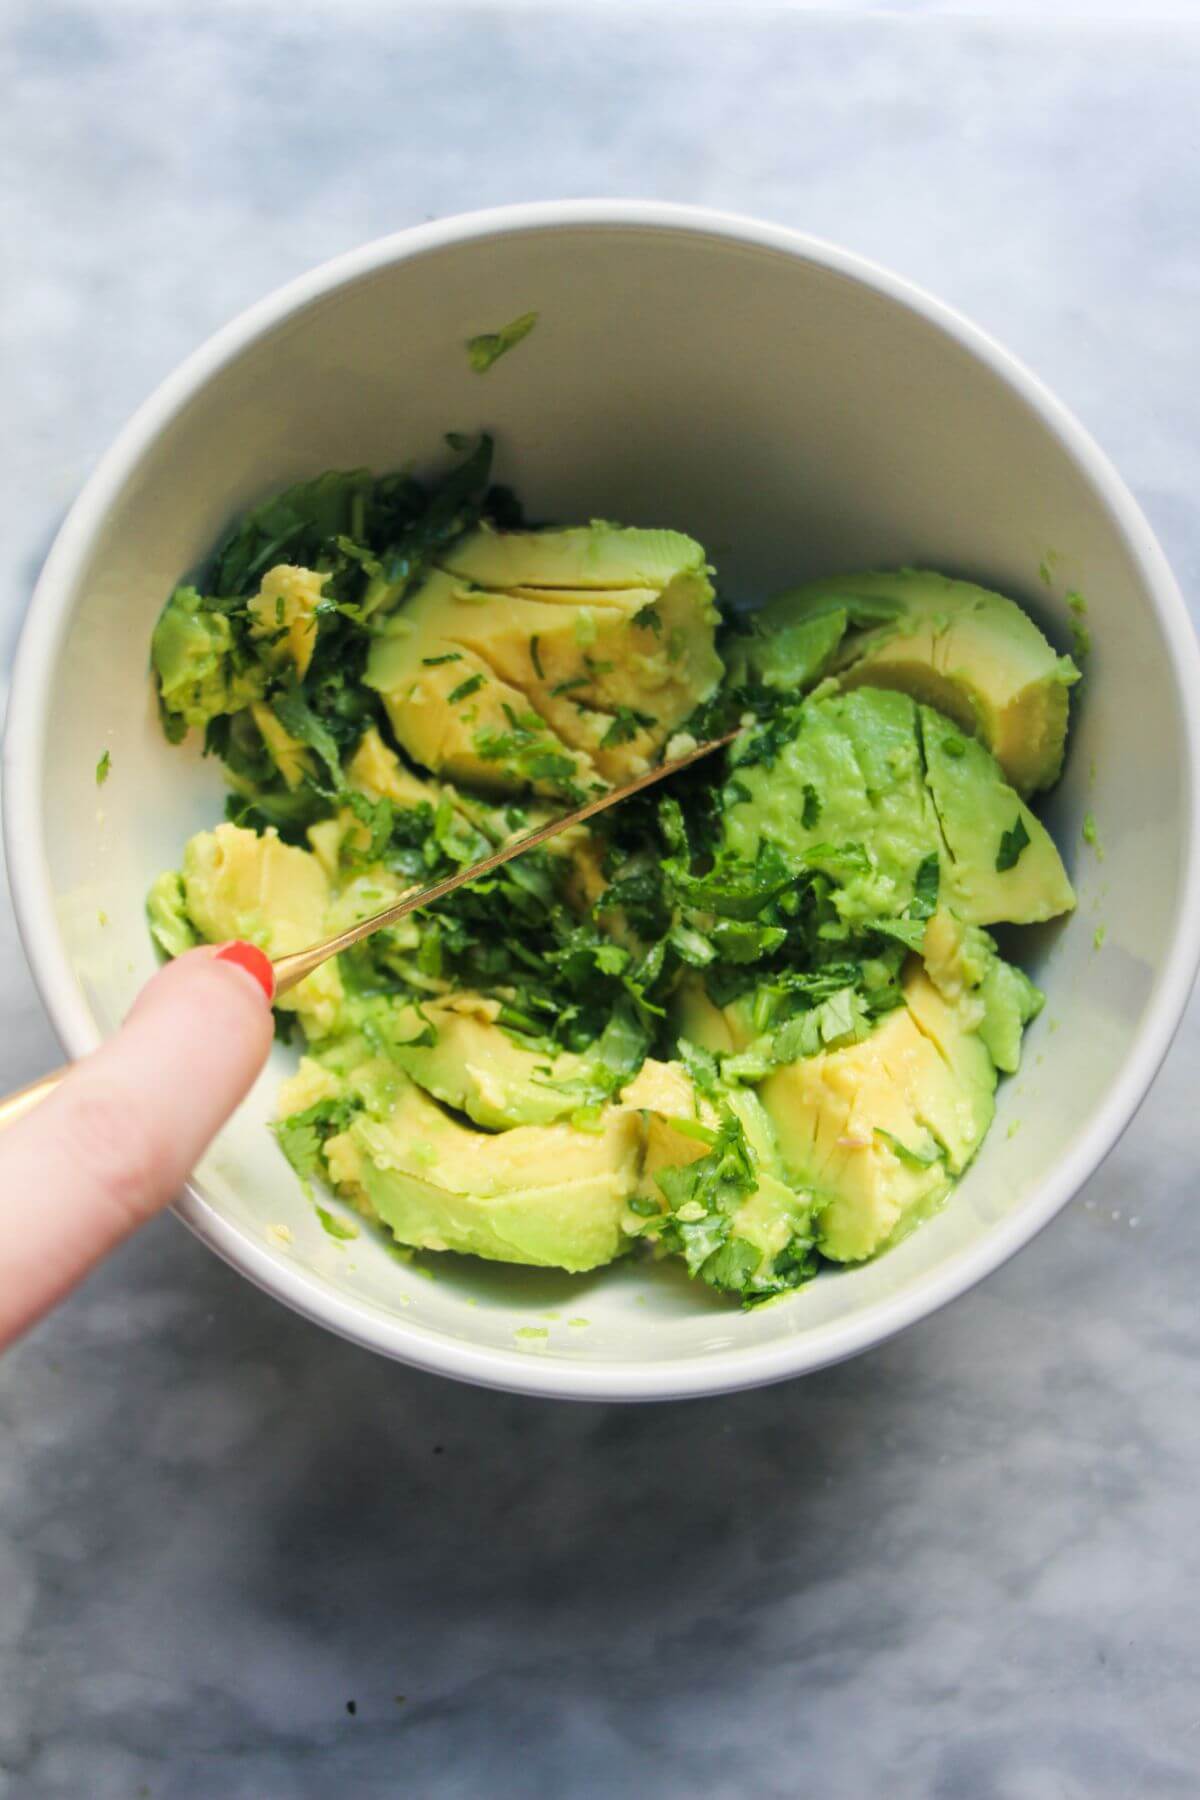 Avocado flesh and chopped coriander in a small white bowl with a hand holding a gold knife mixing them.